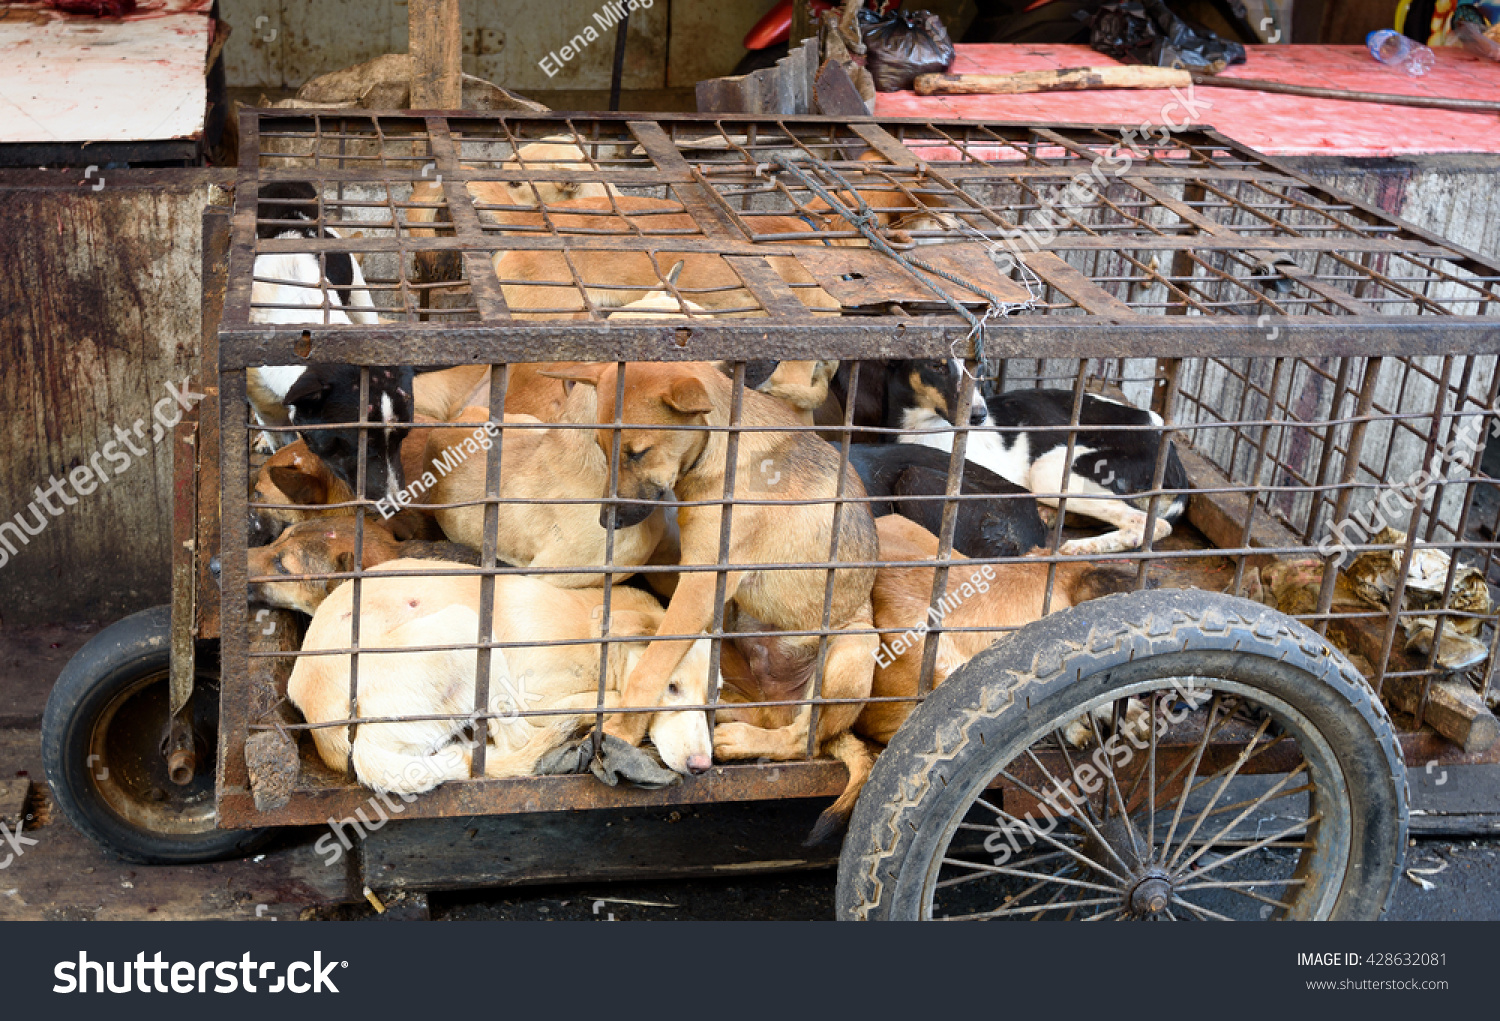 Dogs in cage awaiting slaughter on Tomohon Traditional Market. North Sulawesi. Indonesia #428632081